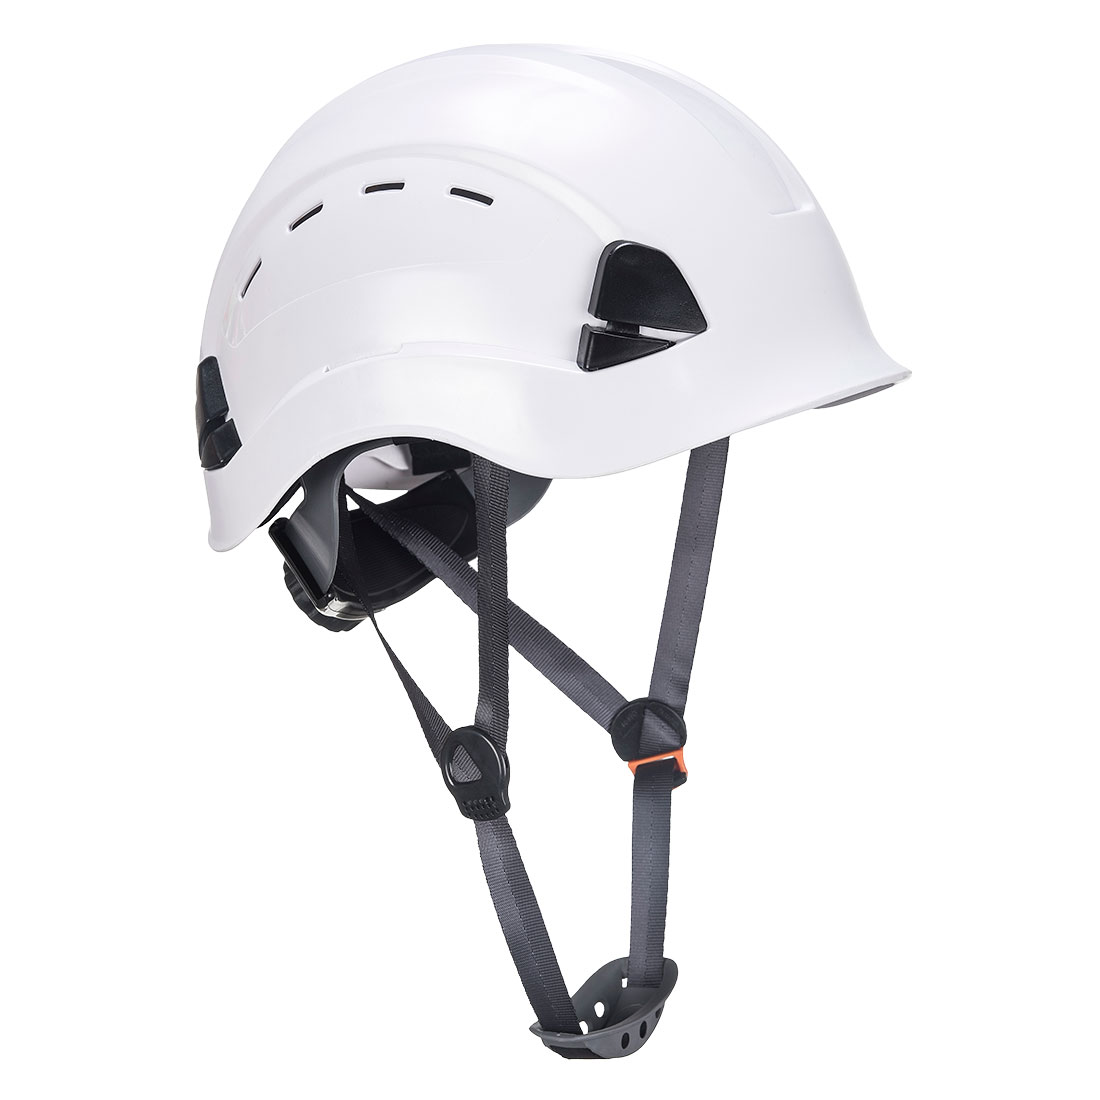 Head Protection, Safety Helmet